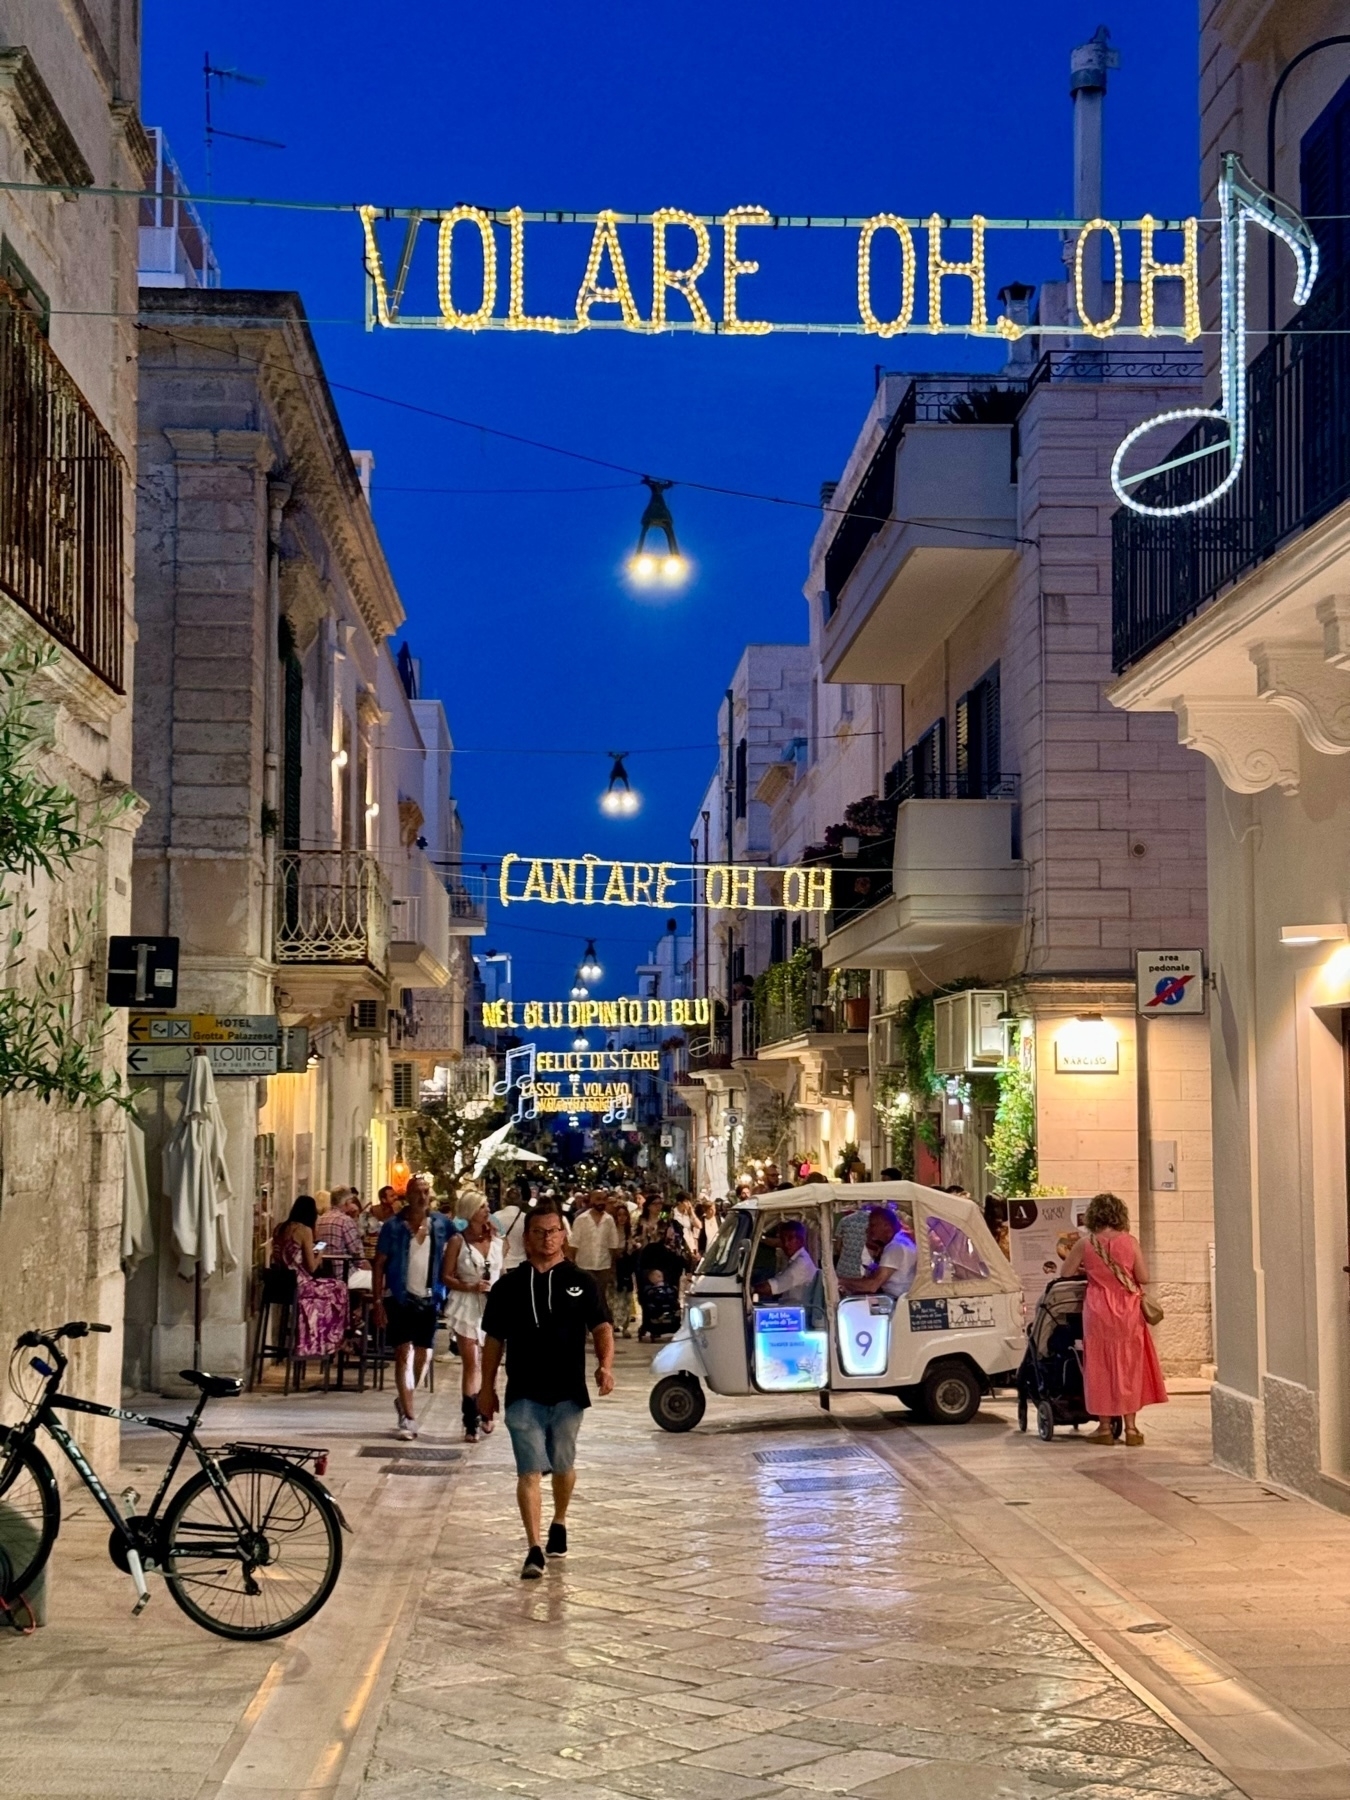 A charming evening street scene in an Italian town. Decorative lights hang above, displaying the words “VOLARE OH OH” and a musical note. The street is bustling with people walking and enjoying the evening.